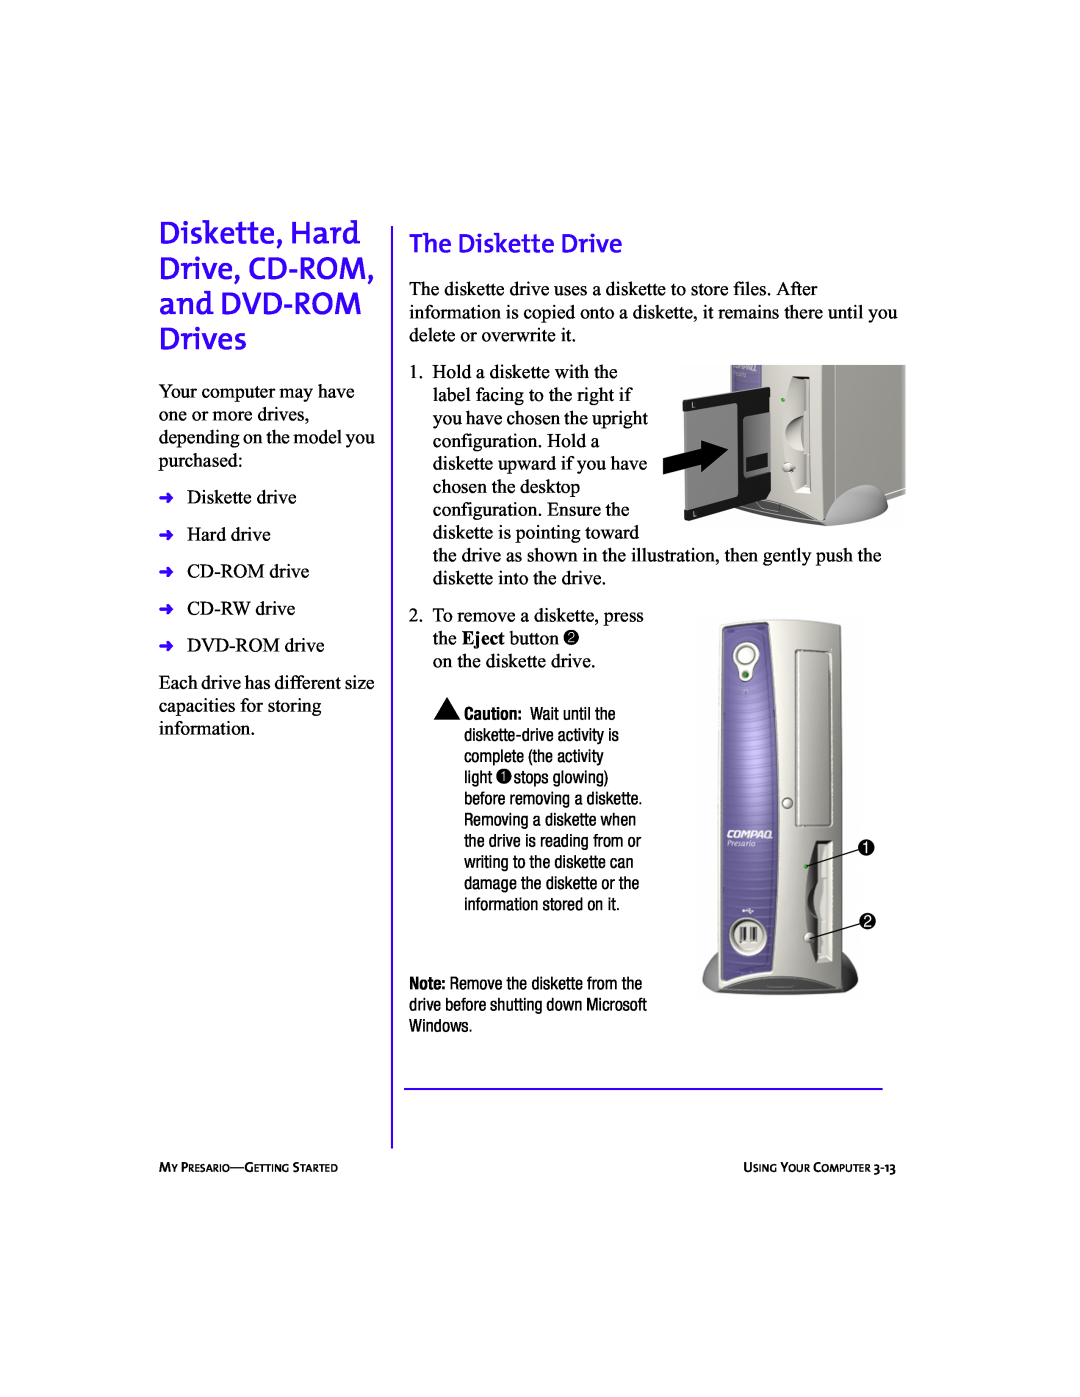 Compaq 5BW474 manual Diskette, Hard Drive, CD-ROM and DVD-ROM Drives, The Diskette Drive 